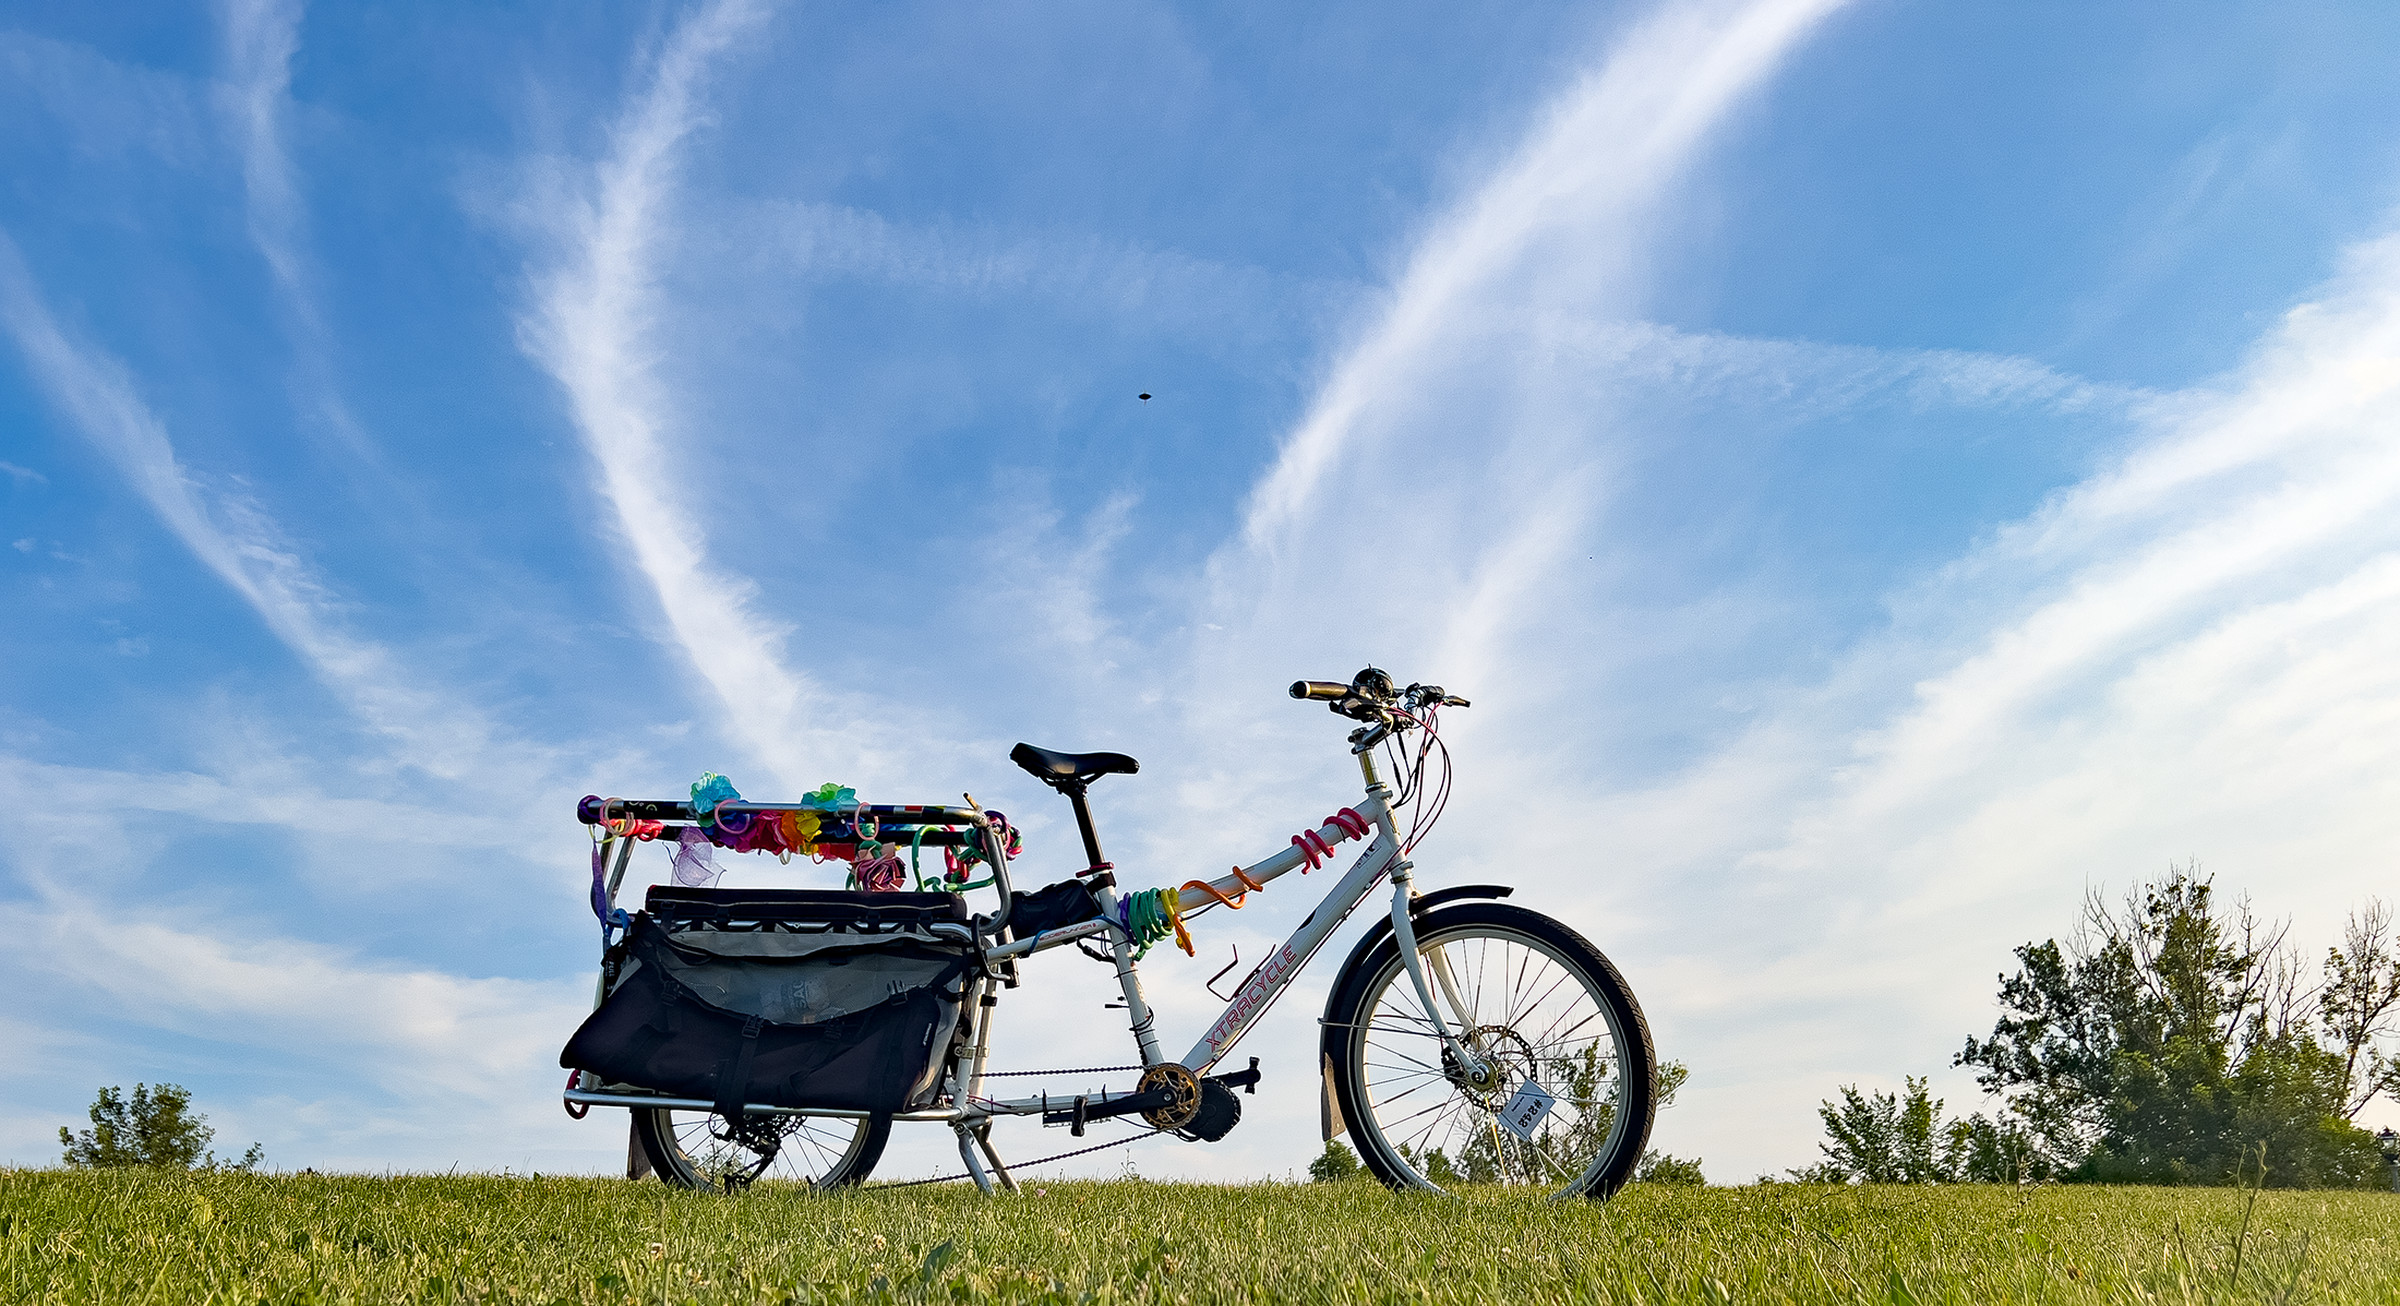 A picture of the bike sitting on a grassy hill. Behind it, a blue sky is filled with wispy, thin clouds stretching over the bike.